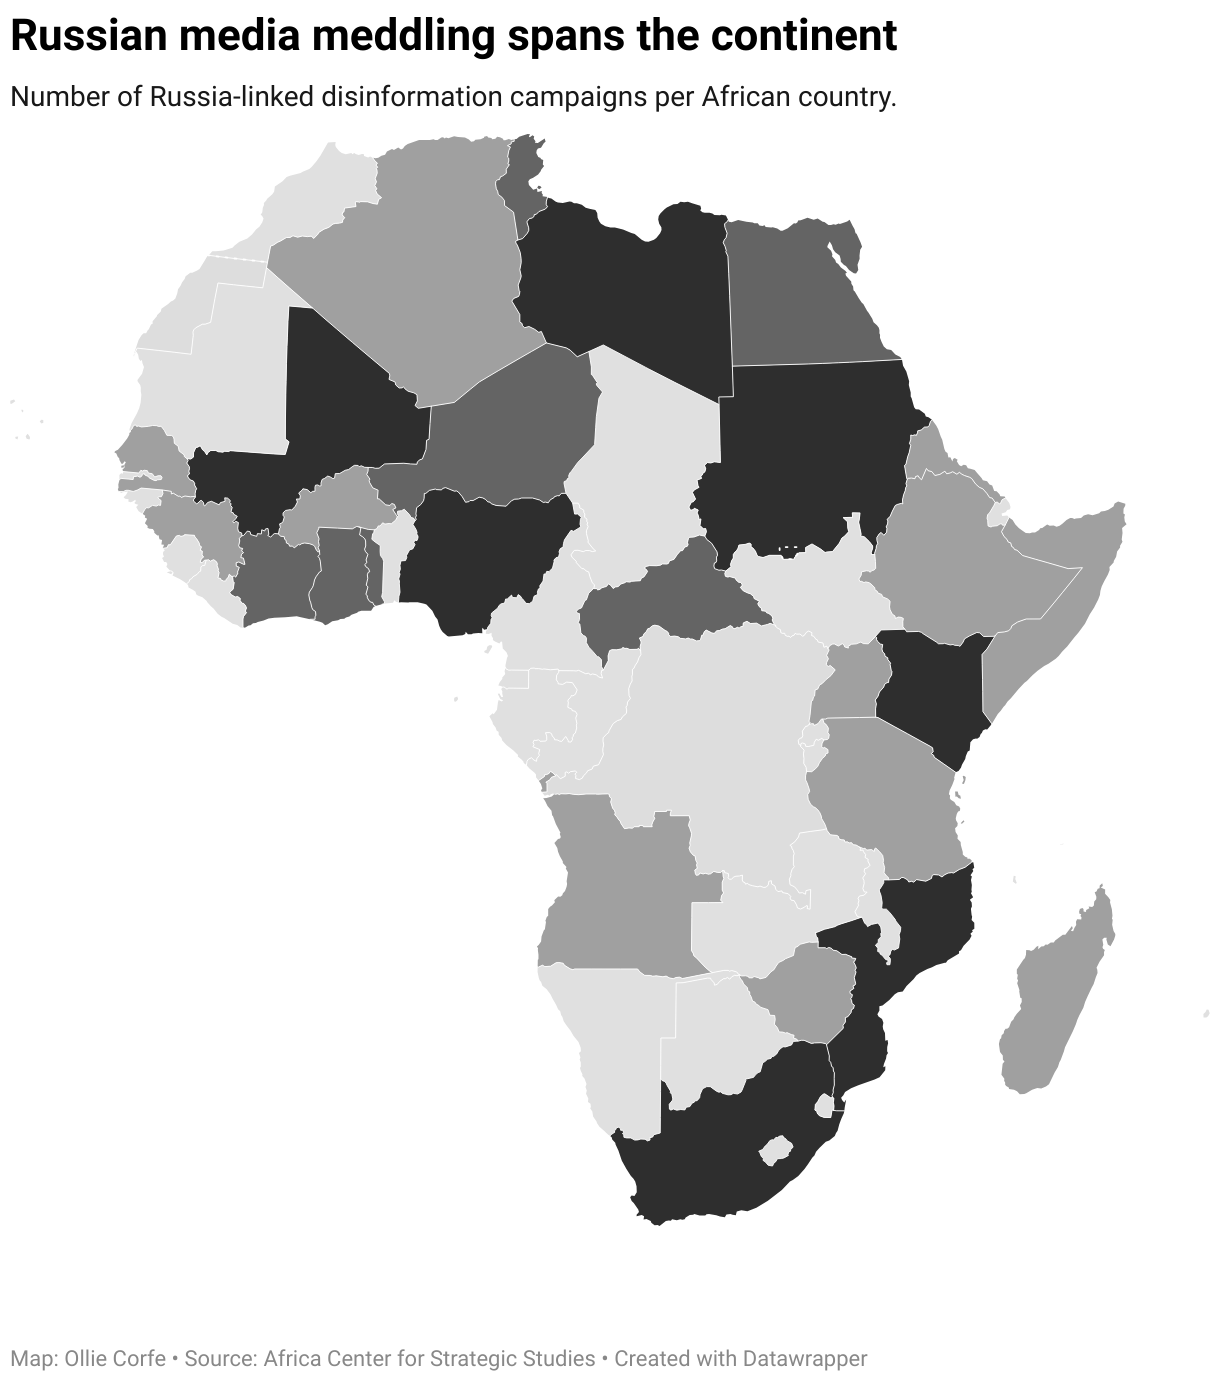 Map of Africa by disinformation campaigns. 